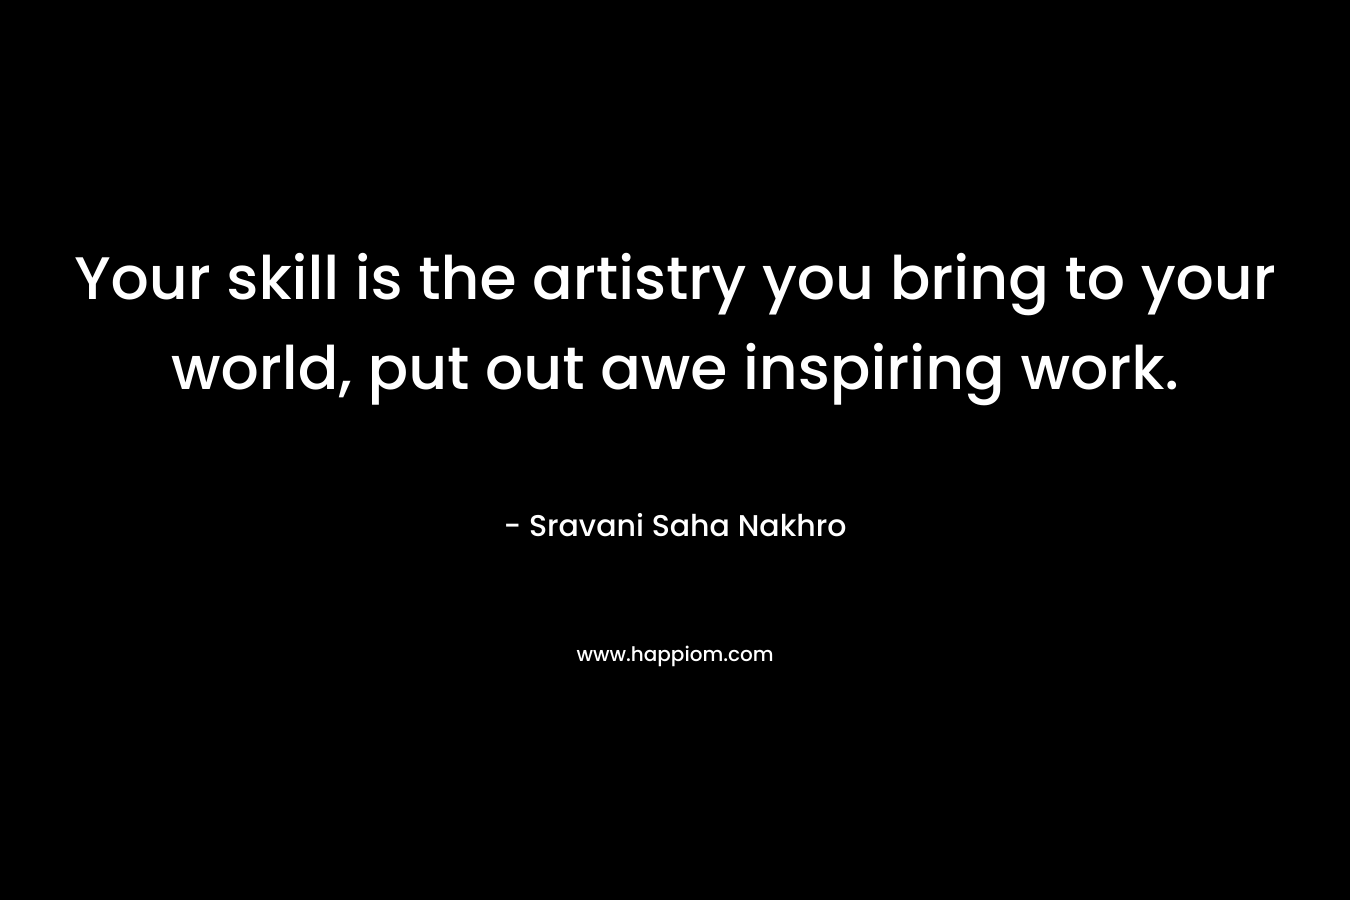 Your skill is the artistry you bring to your world, put out awe inspiring work.